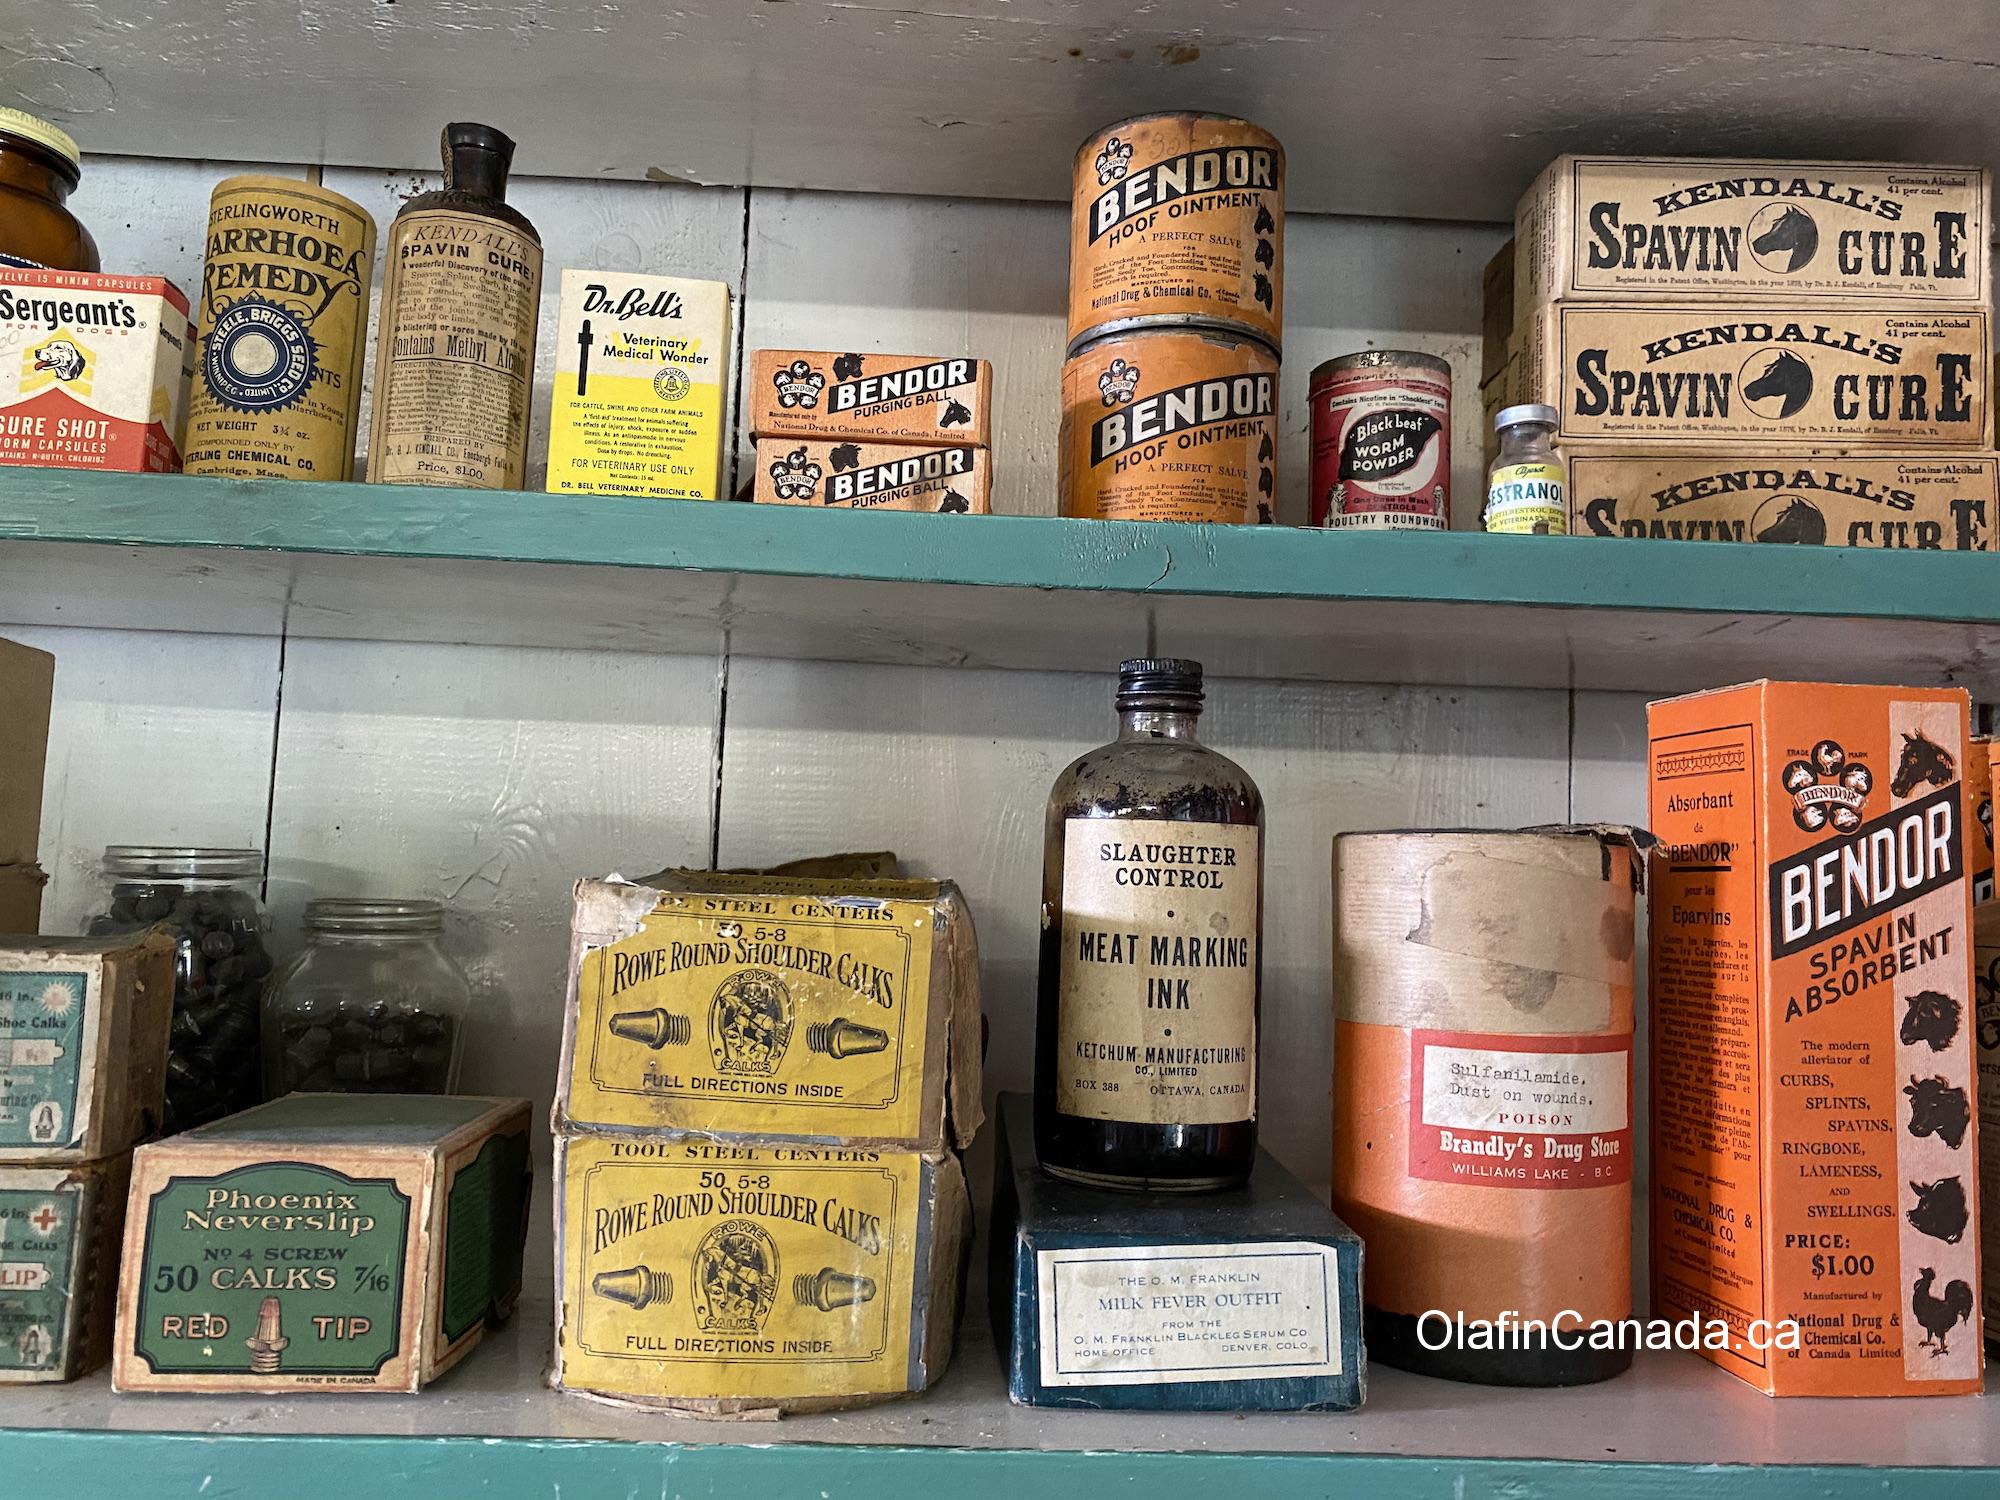 Animal pharma products at the General Store in 153 Mile House #olafincanada #britishcolumbia #discoverbc #abandonedbc #153milehouse #generalstore #backintime